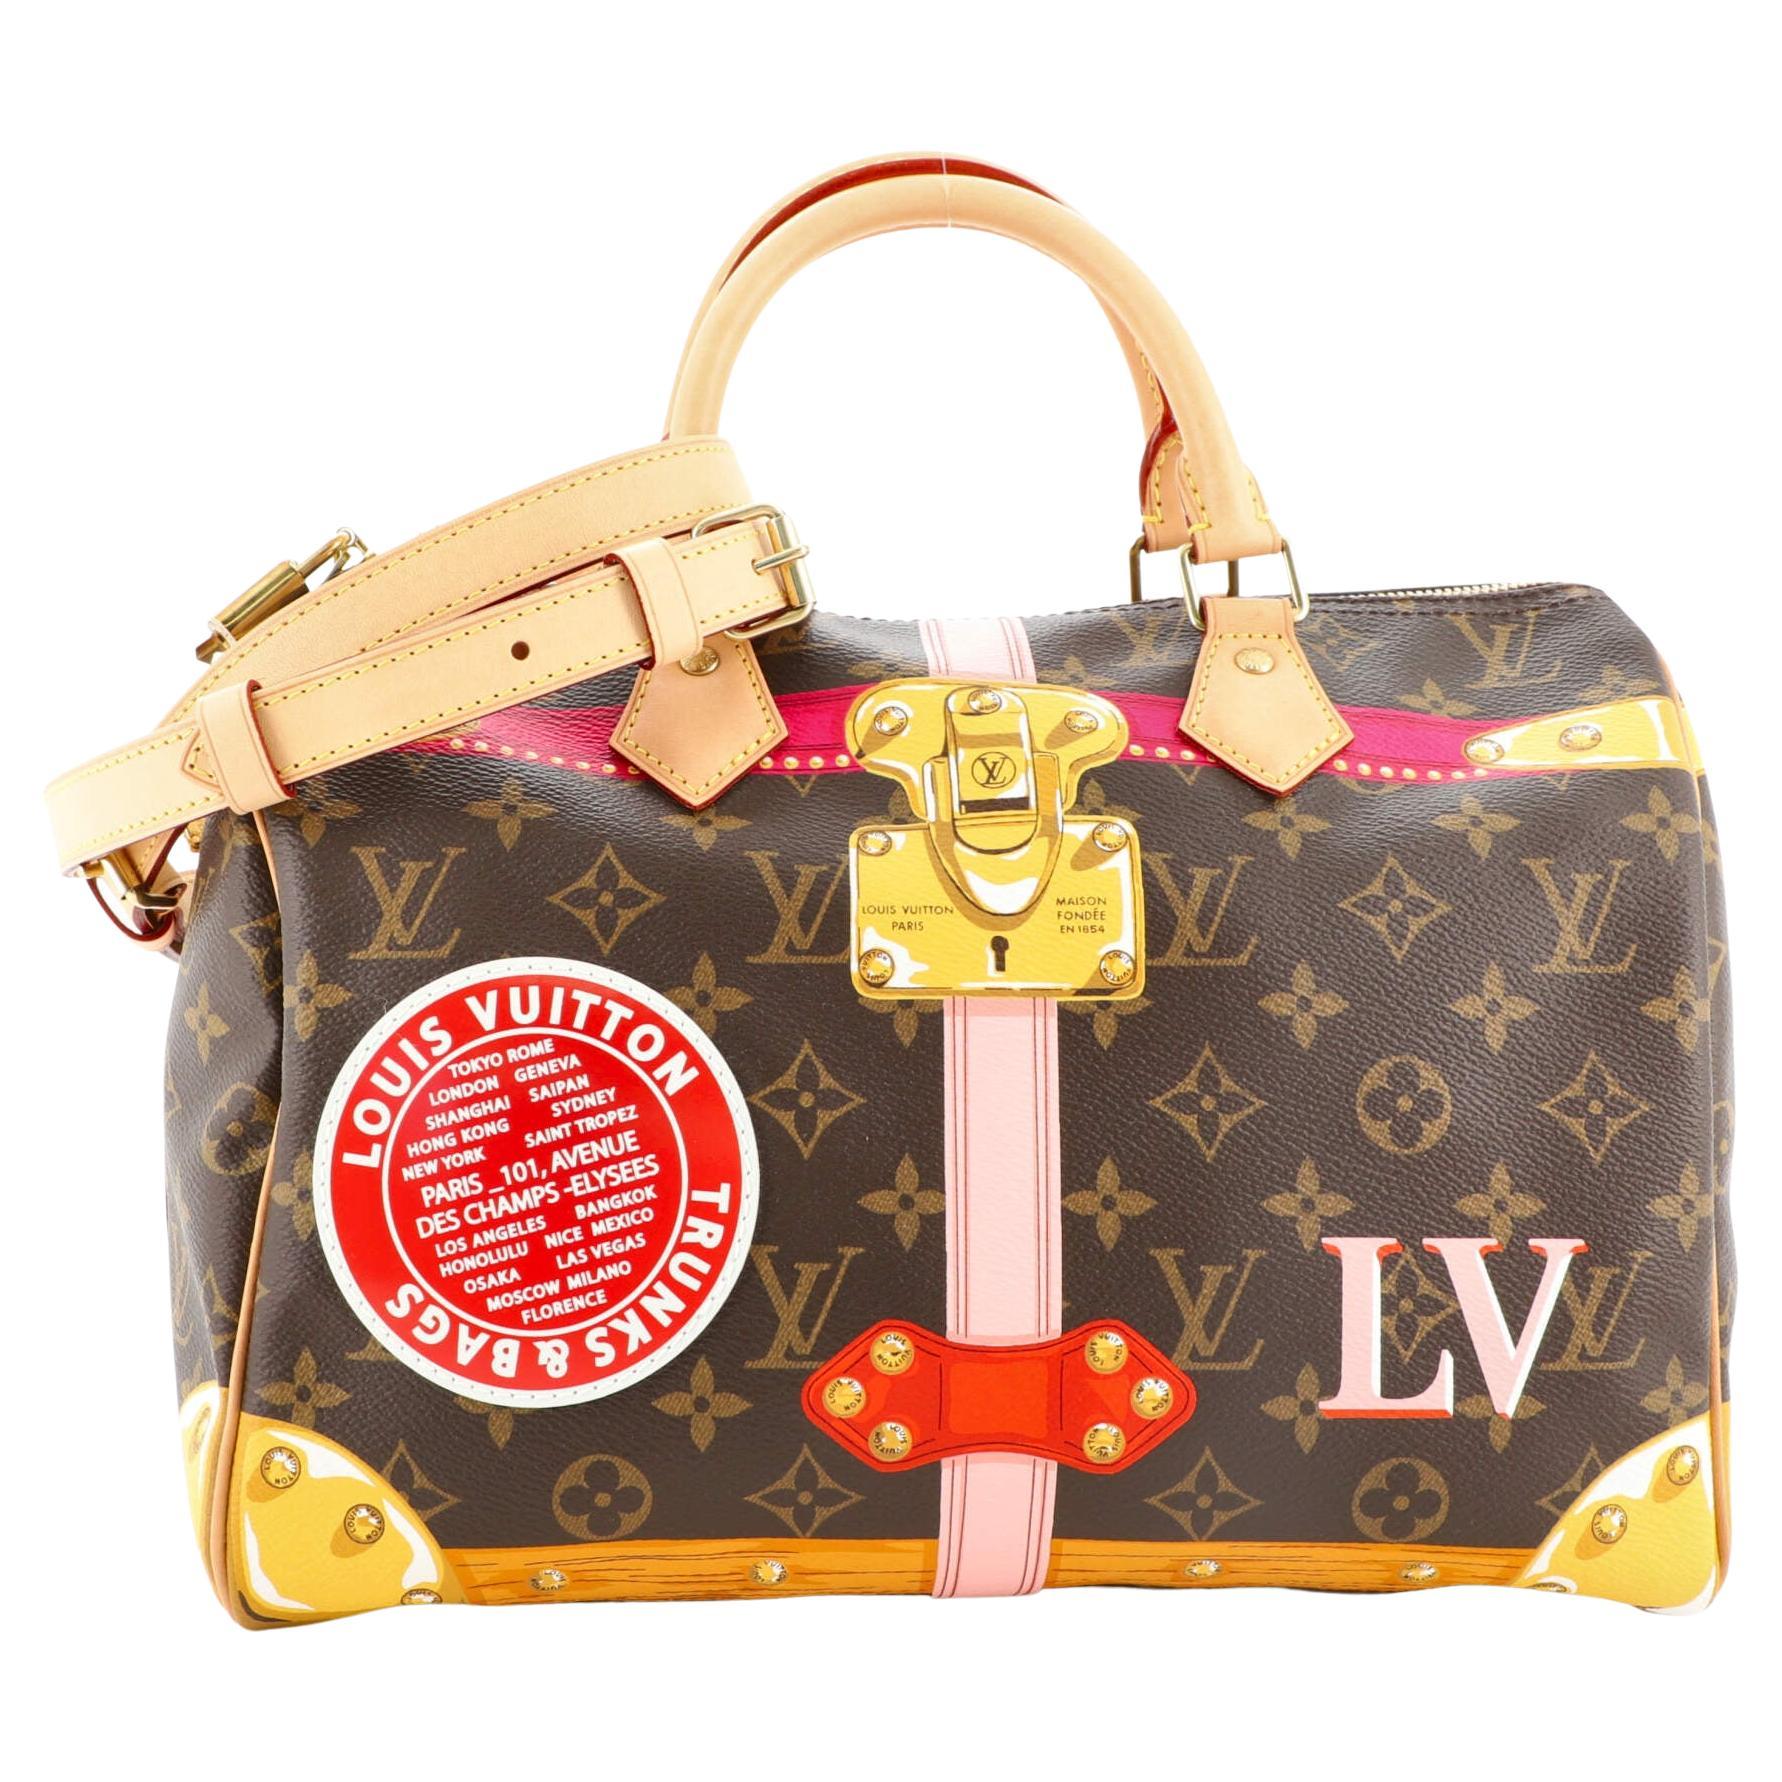 Louis Vuitton Limited Edition Time Trunk Speedy Bandoulière 25 - New* -SOLD